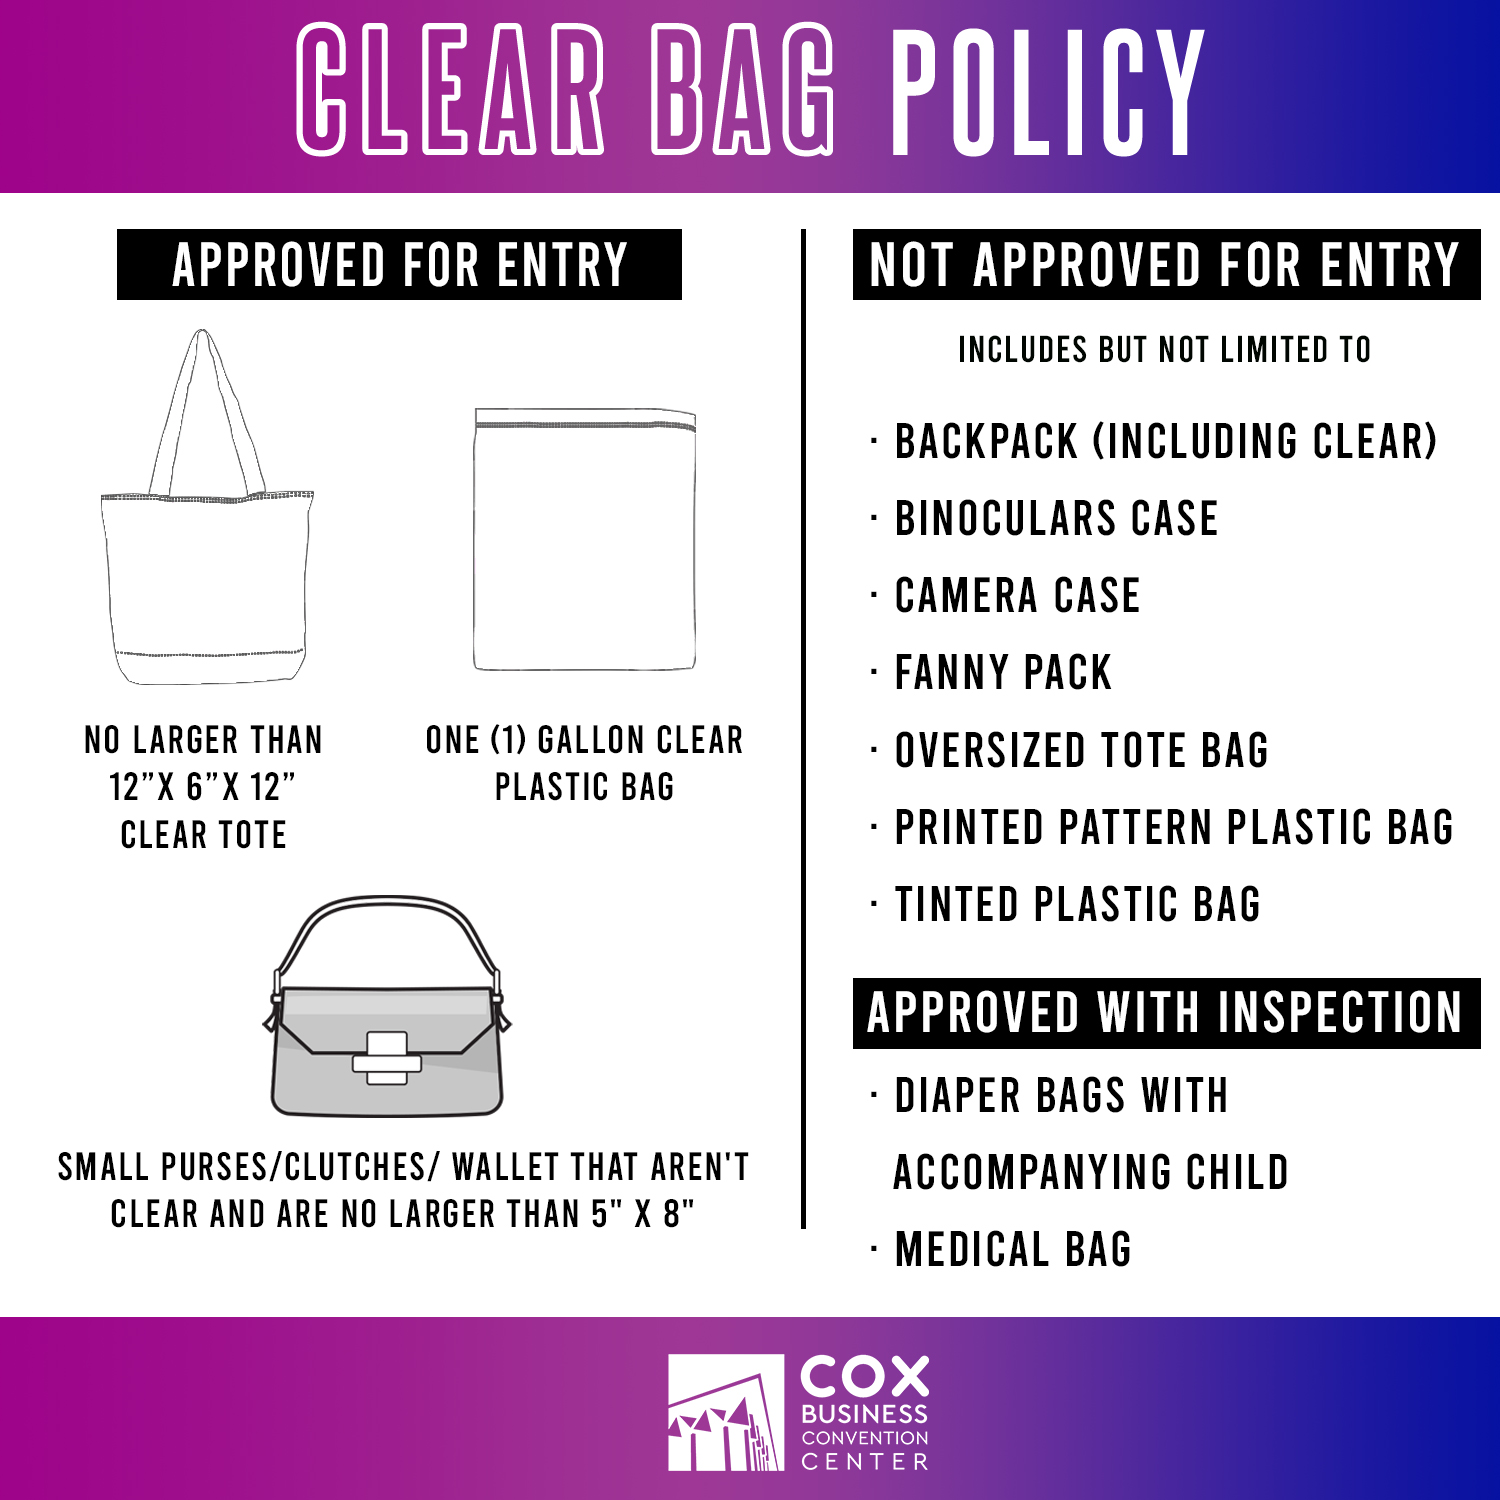 Paycom Center - Have you heard? We have a Clear Bag Policy